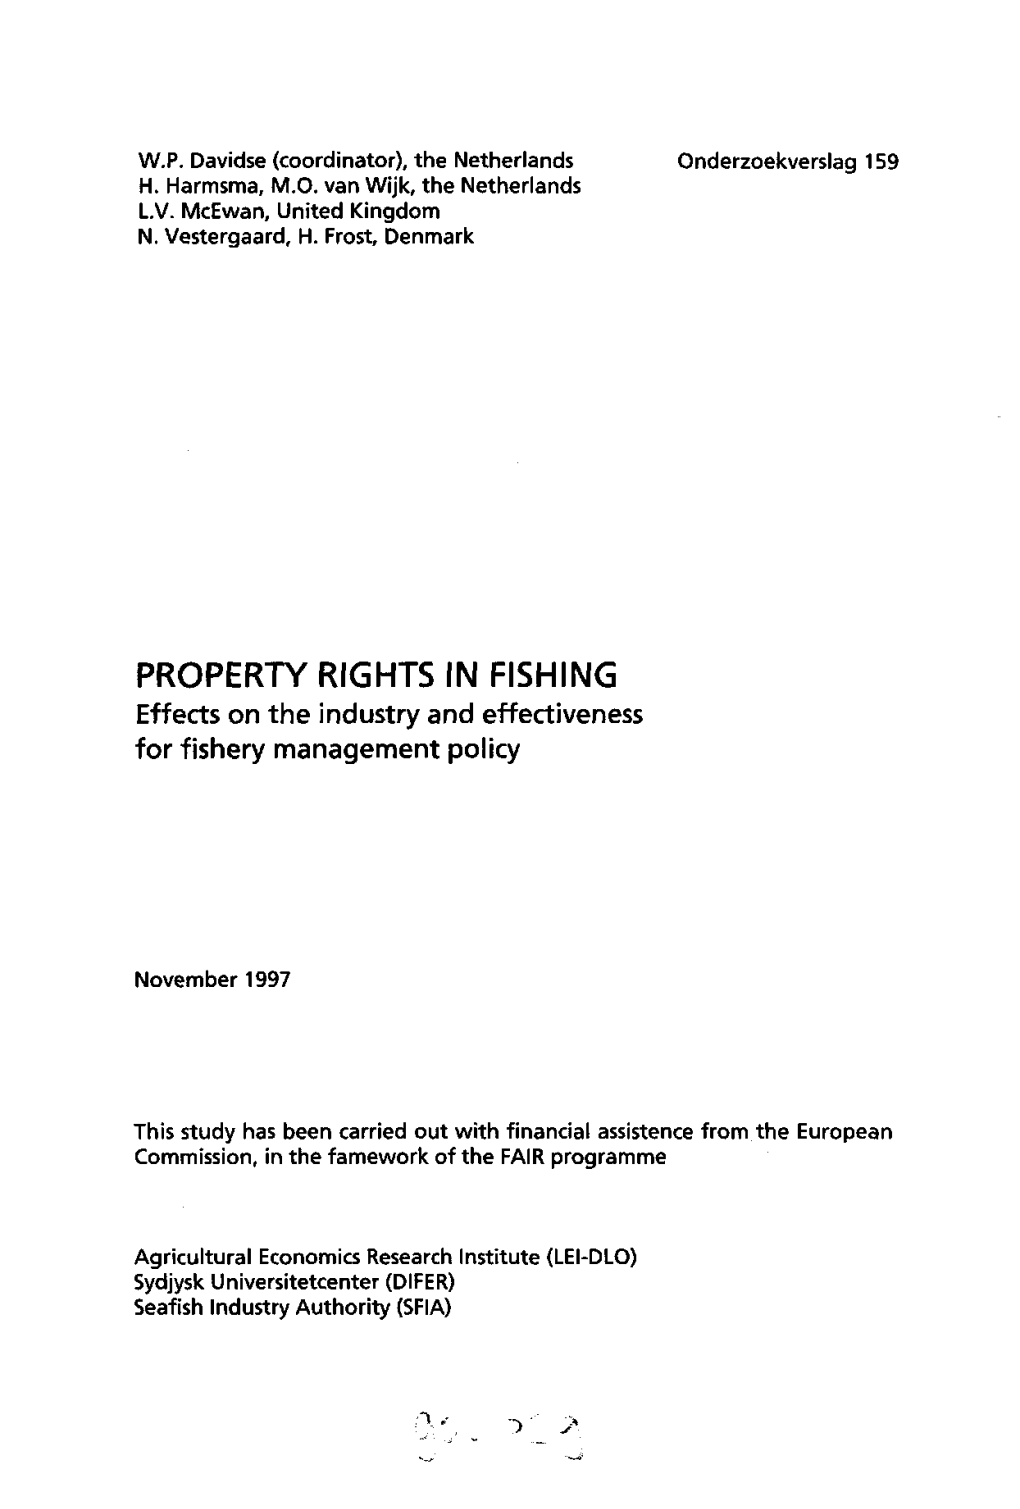 PROPERTY RIGHTS in FISHING Effects on the Industry and Effectiveness for Fishery Management Policy